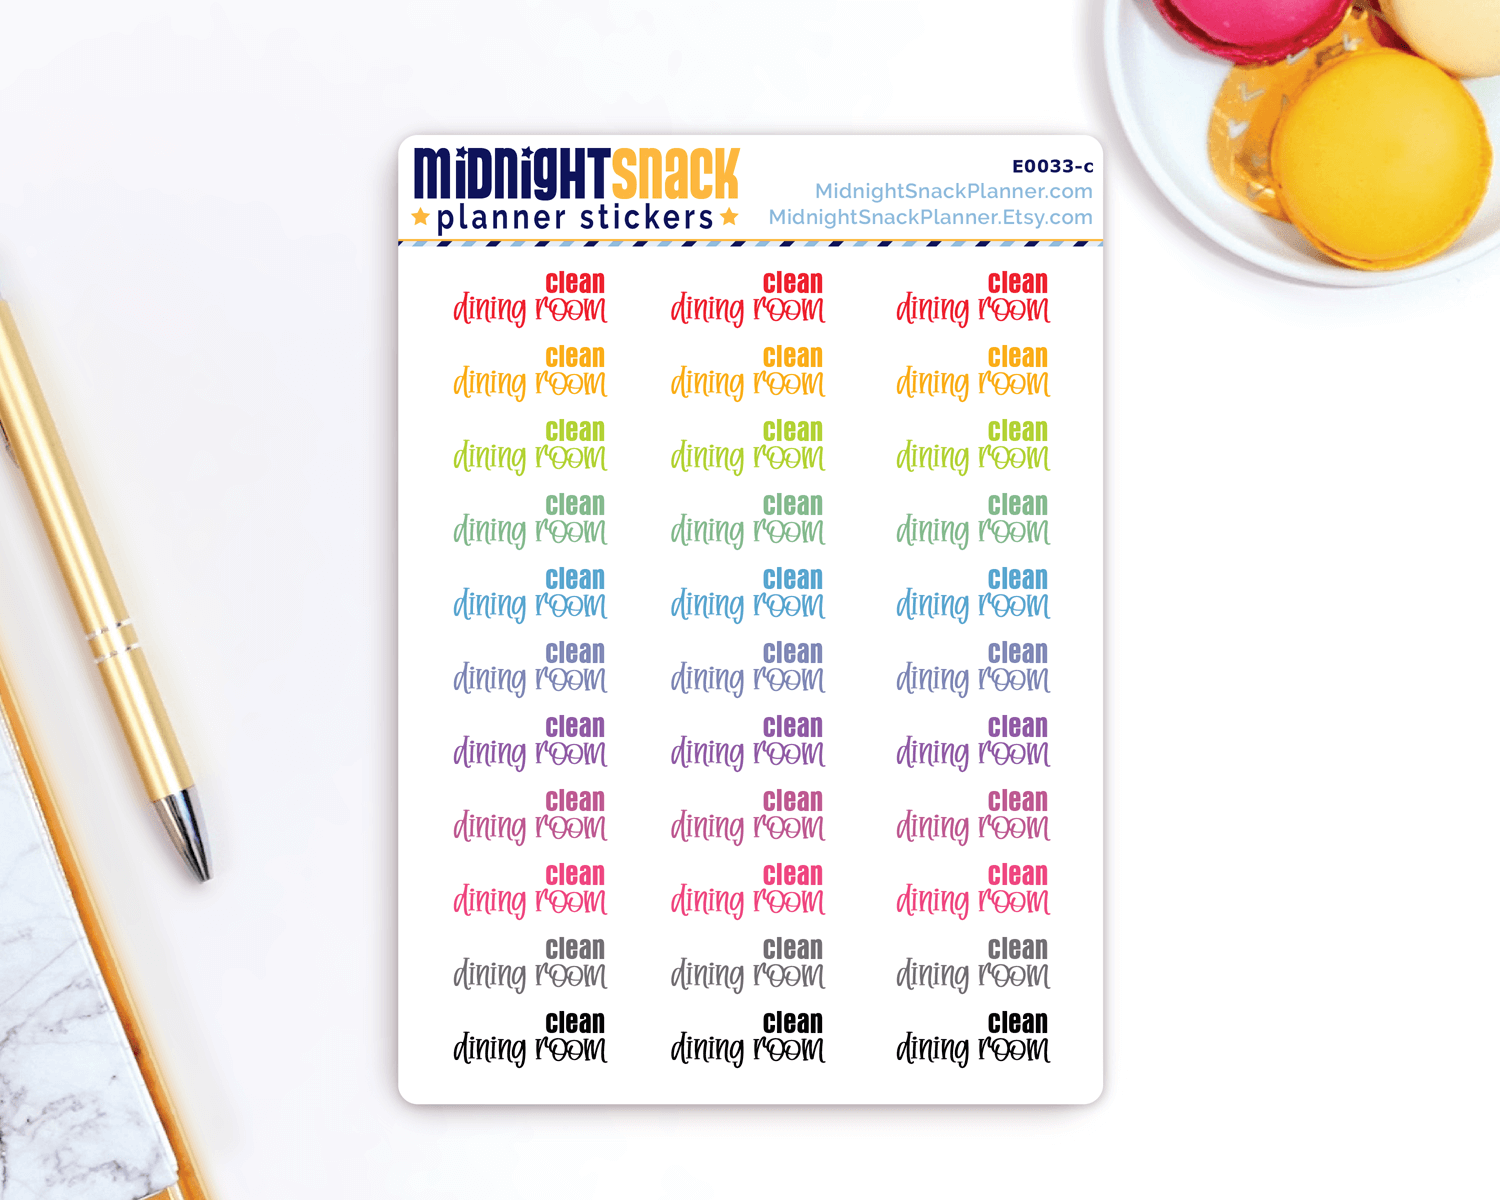 Clean Dining Room Script Planner Stickers: Household Chores Reminder